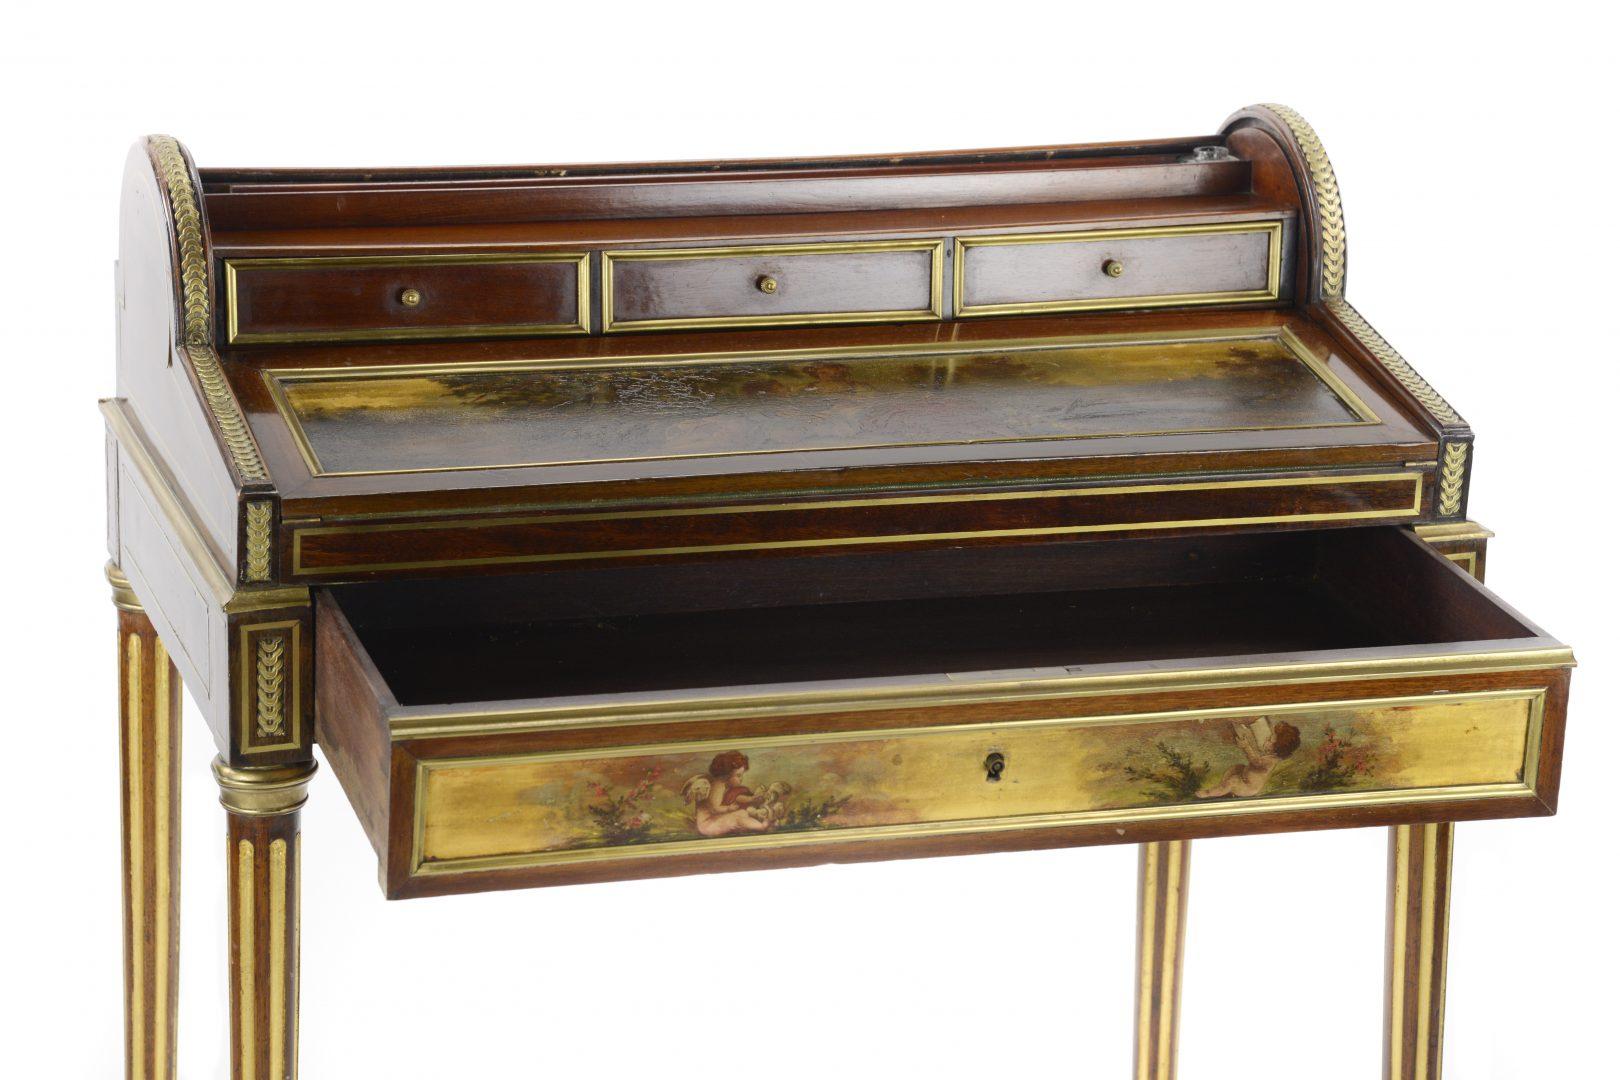 Louis XVI/Transitional Style Mahogany Gilt Metal Mounted Bureau en Pente In Good Condition For Sale In Northwich, GB